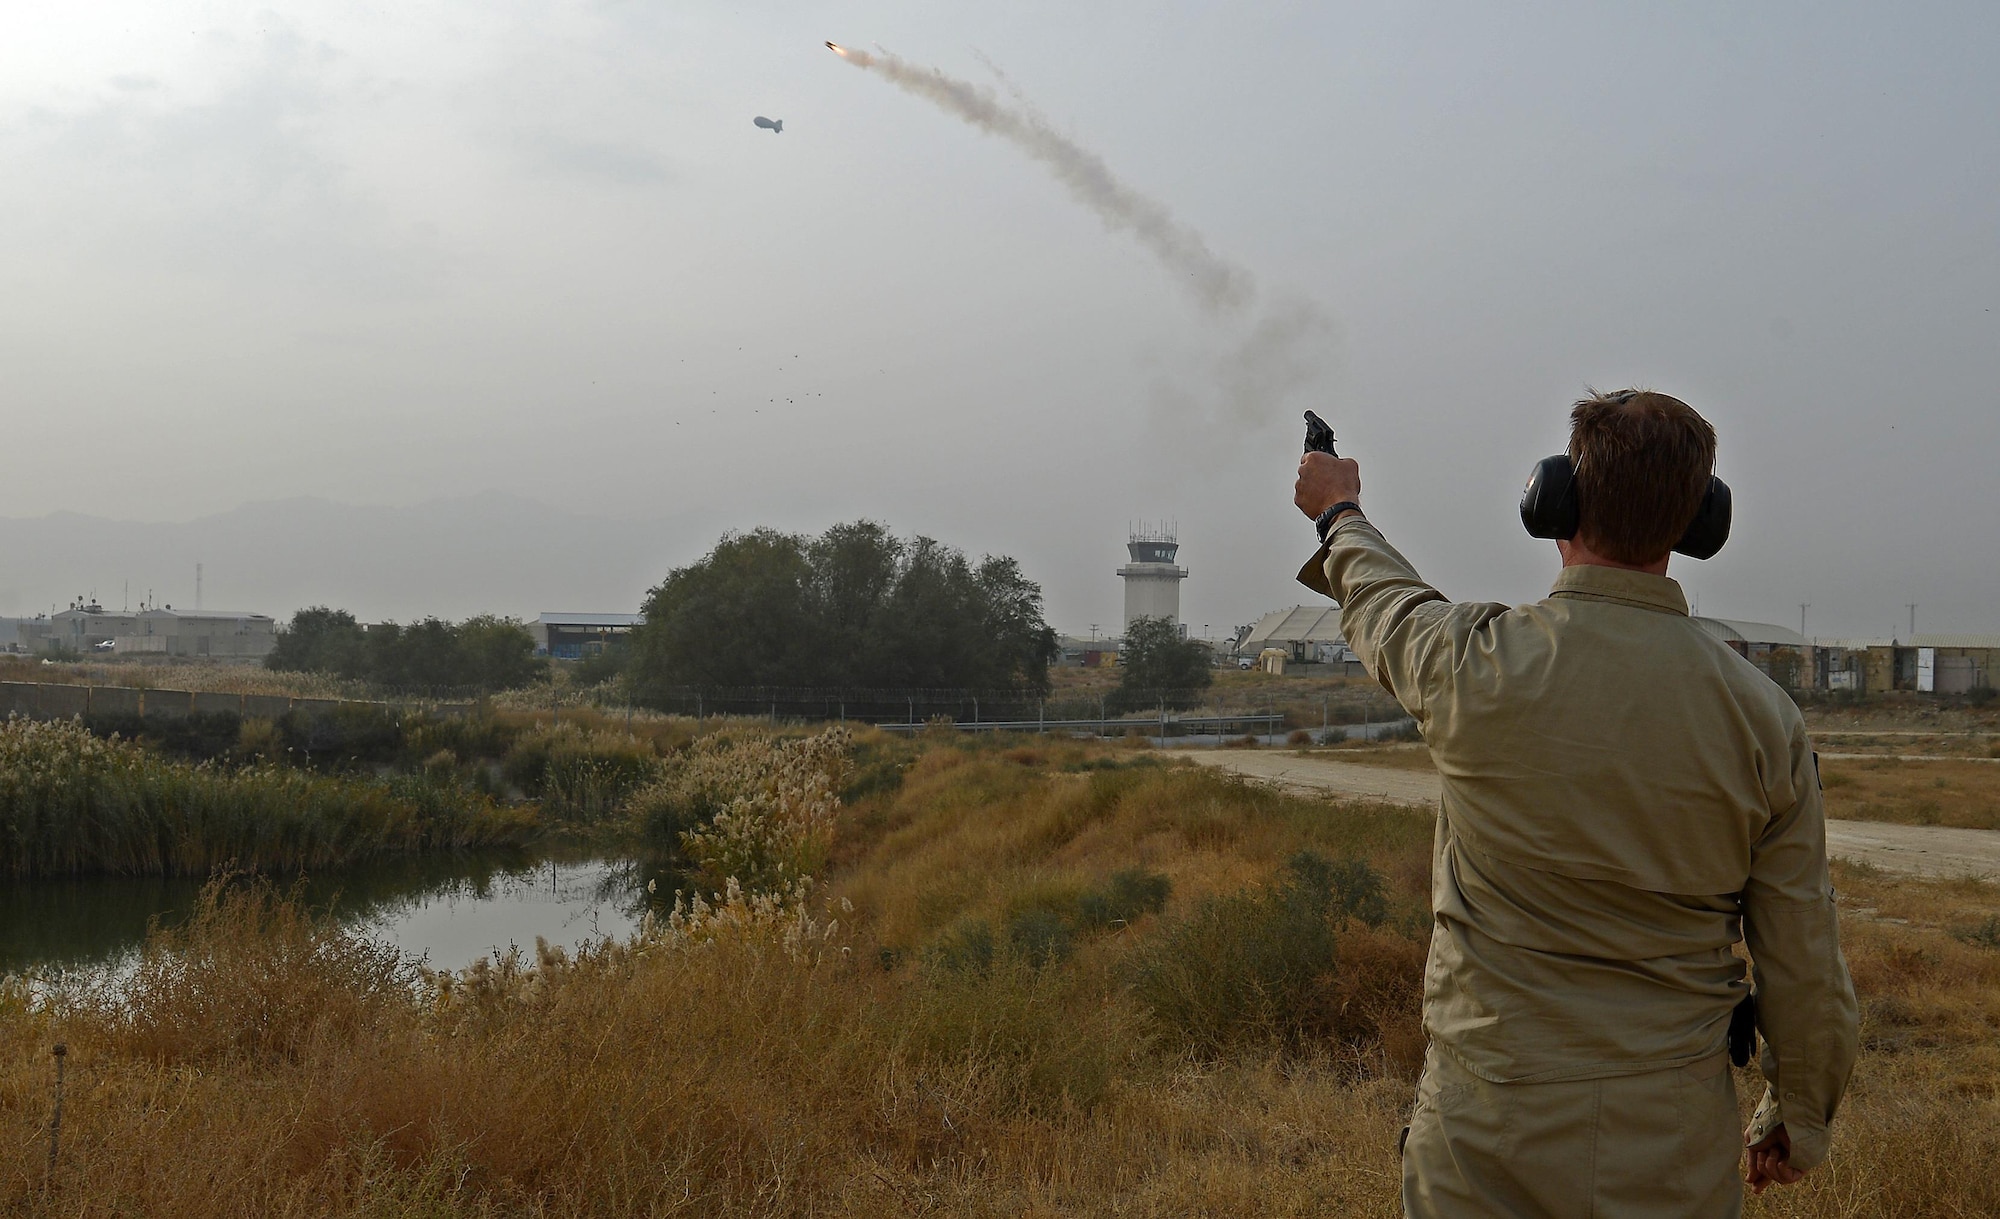 James Capps, 455th Air Expeditionary Wing U.S. Department of Agriculture (APHIS) and BASH forward operating base biologist, shoots off a pyrotechnic to harass wildlife off of Coyote Creek, Nov. 21, 2017 at Bagram Airfield, Afghanistan.